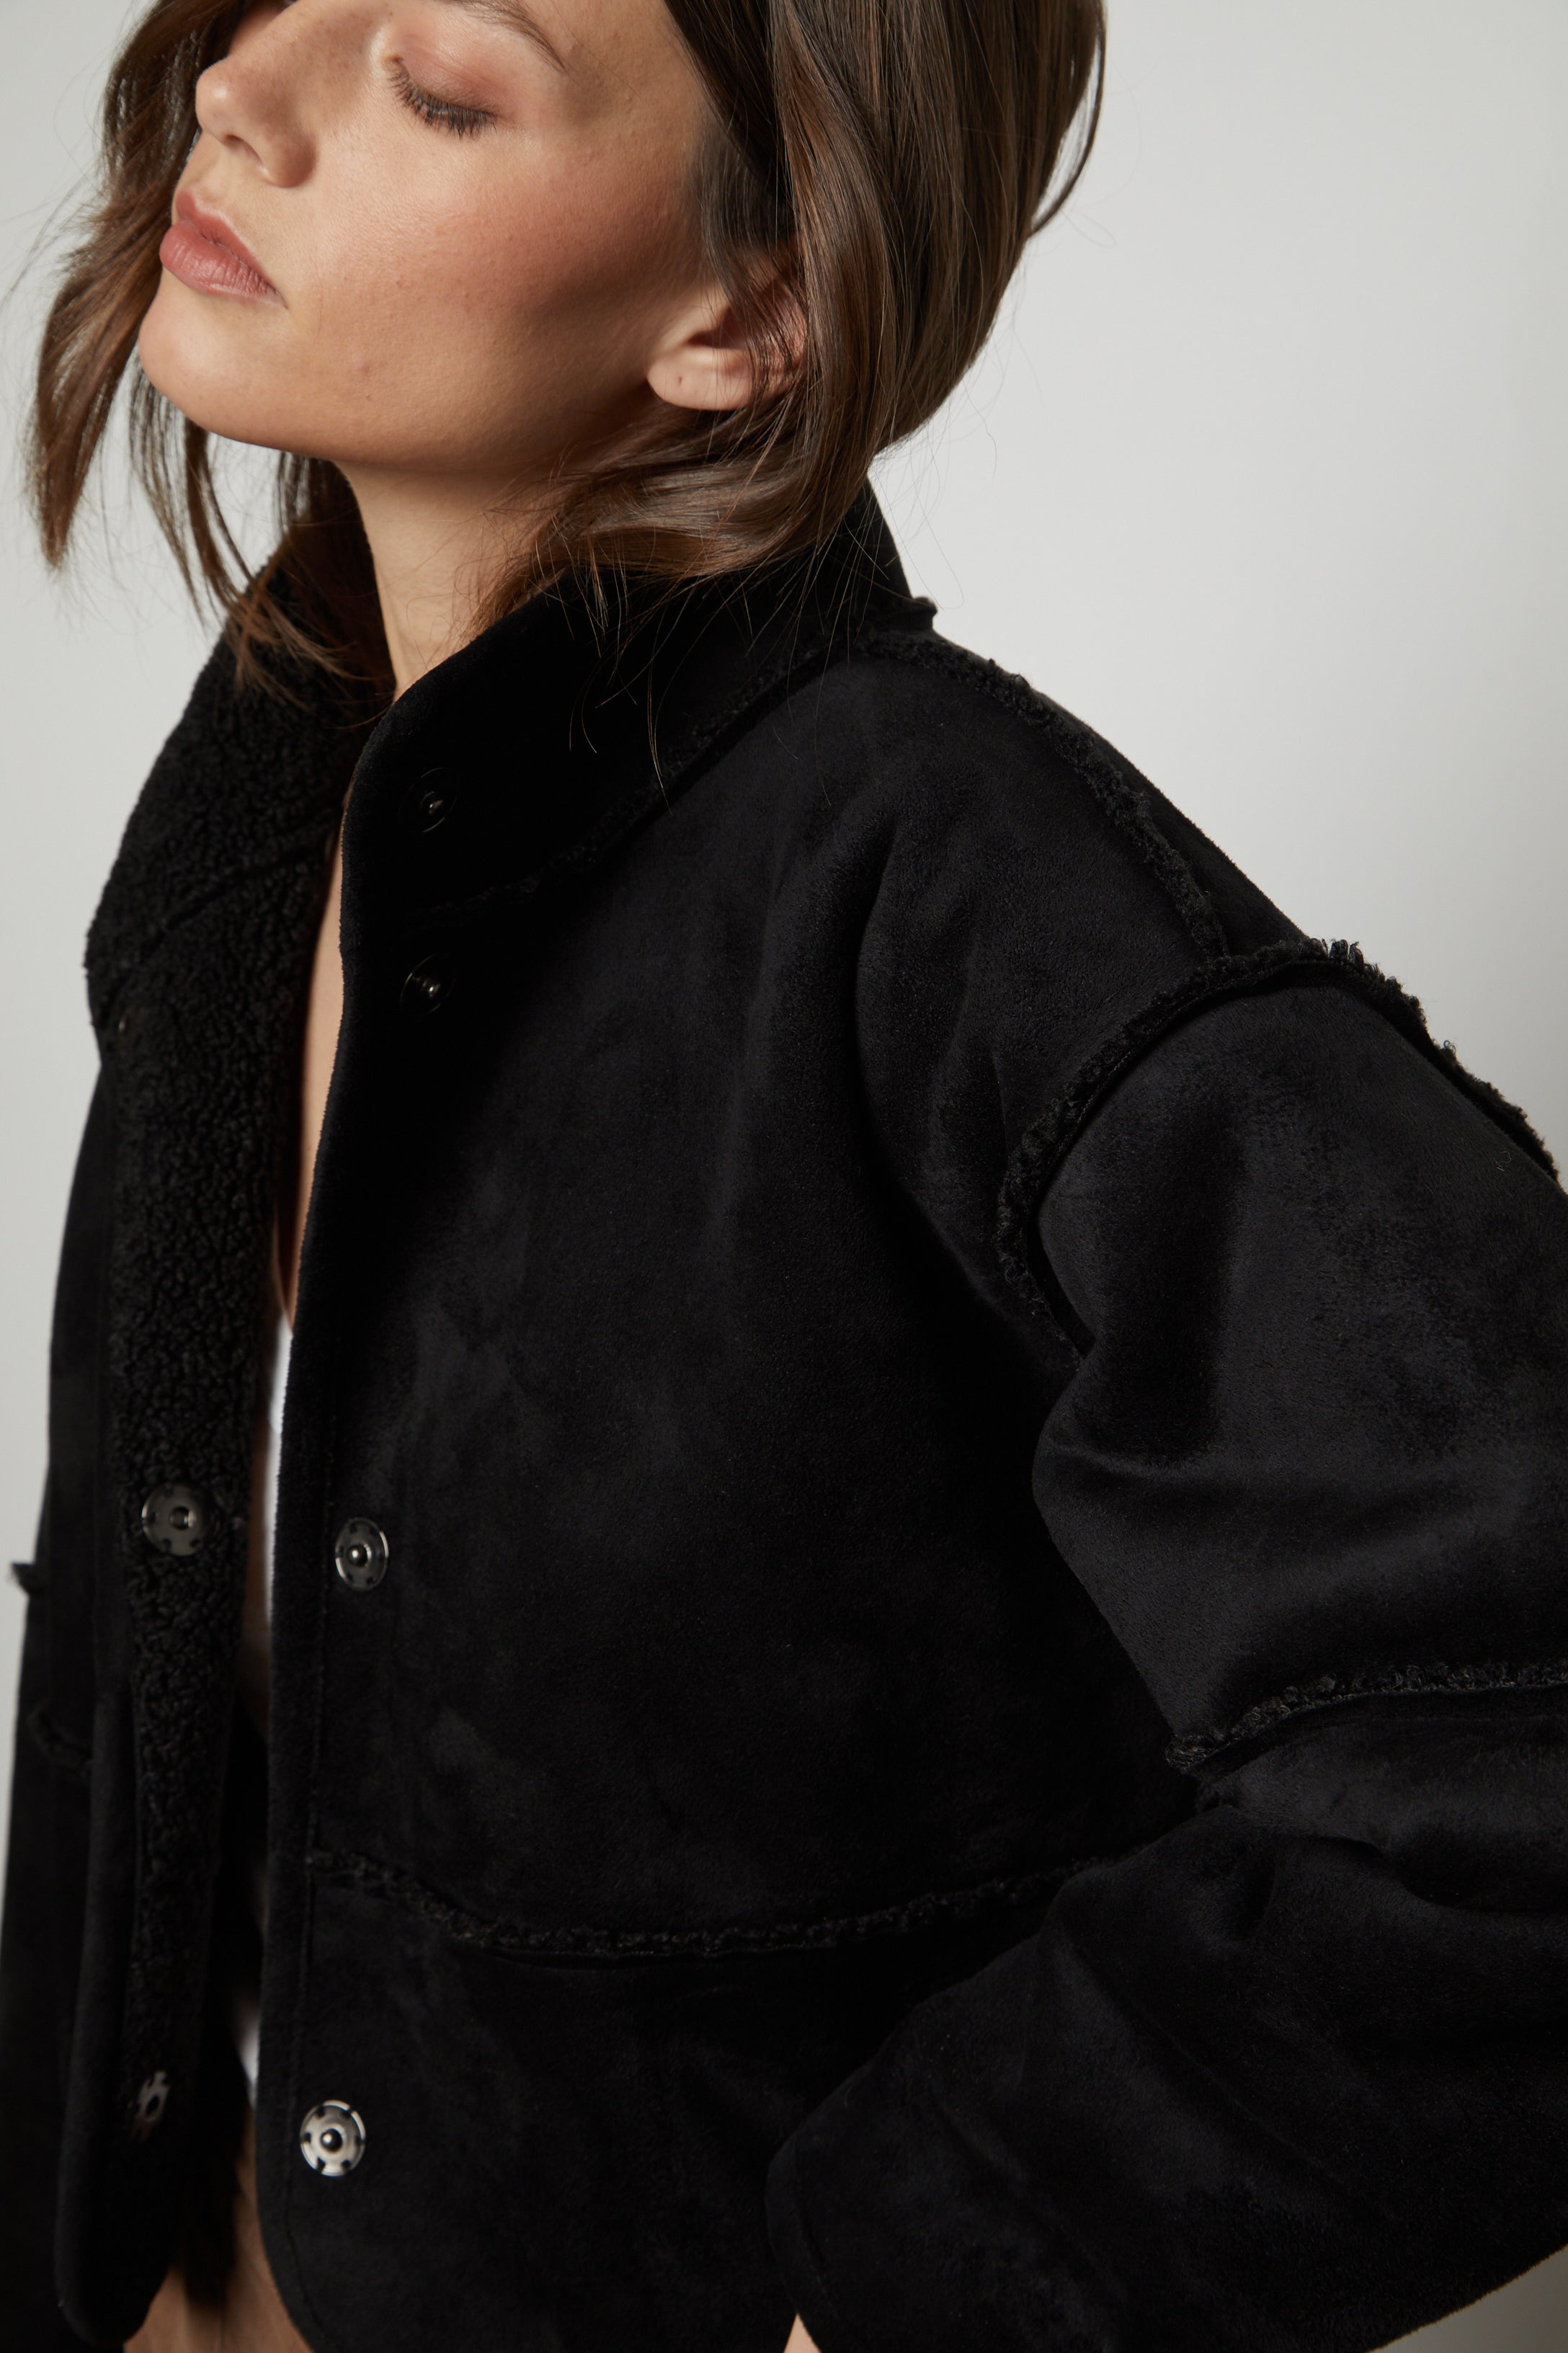   The model is wearing a Velvet by Graham & Spencer KELLY LUX SHERPA REVERSIBLE JACKET. 